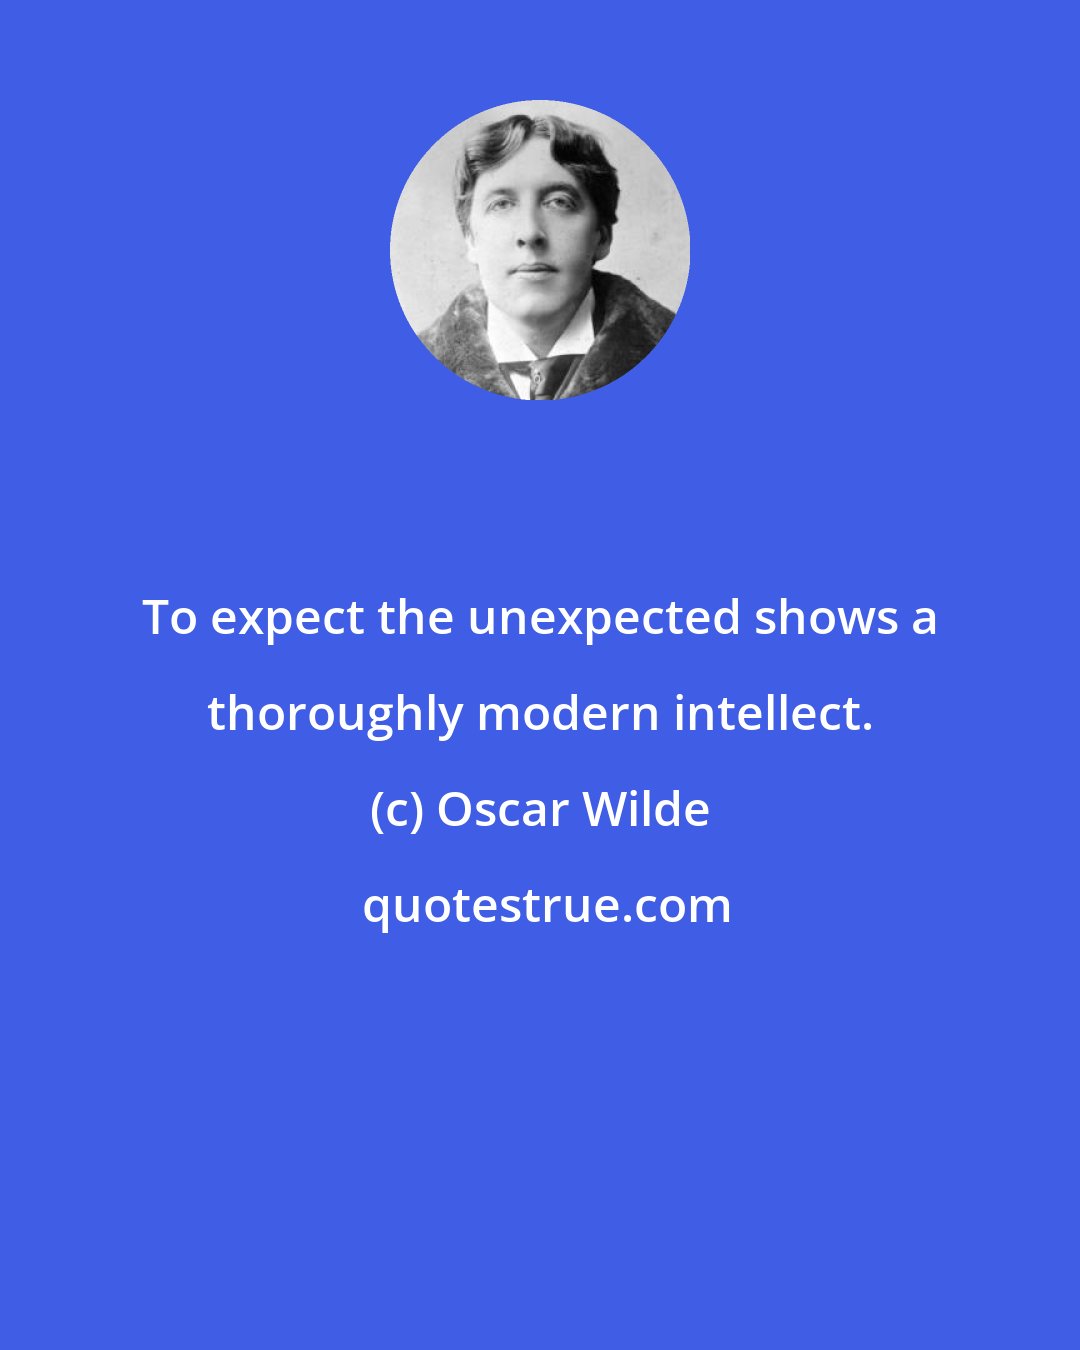 Oscar Wilde: To expect the unexpected shows a thoroughly modern intellect.